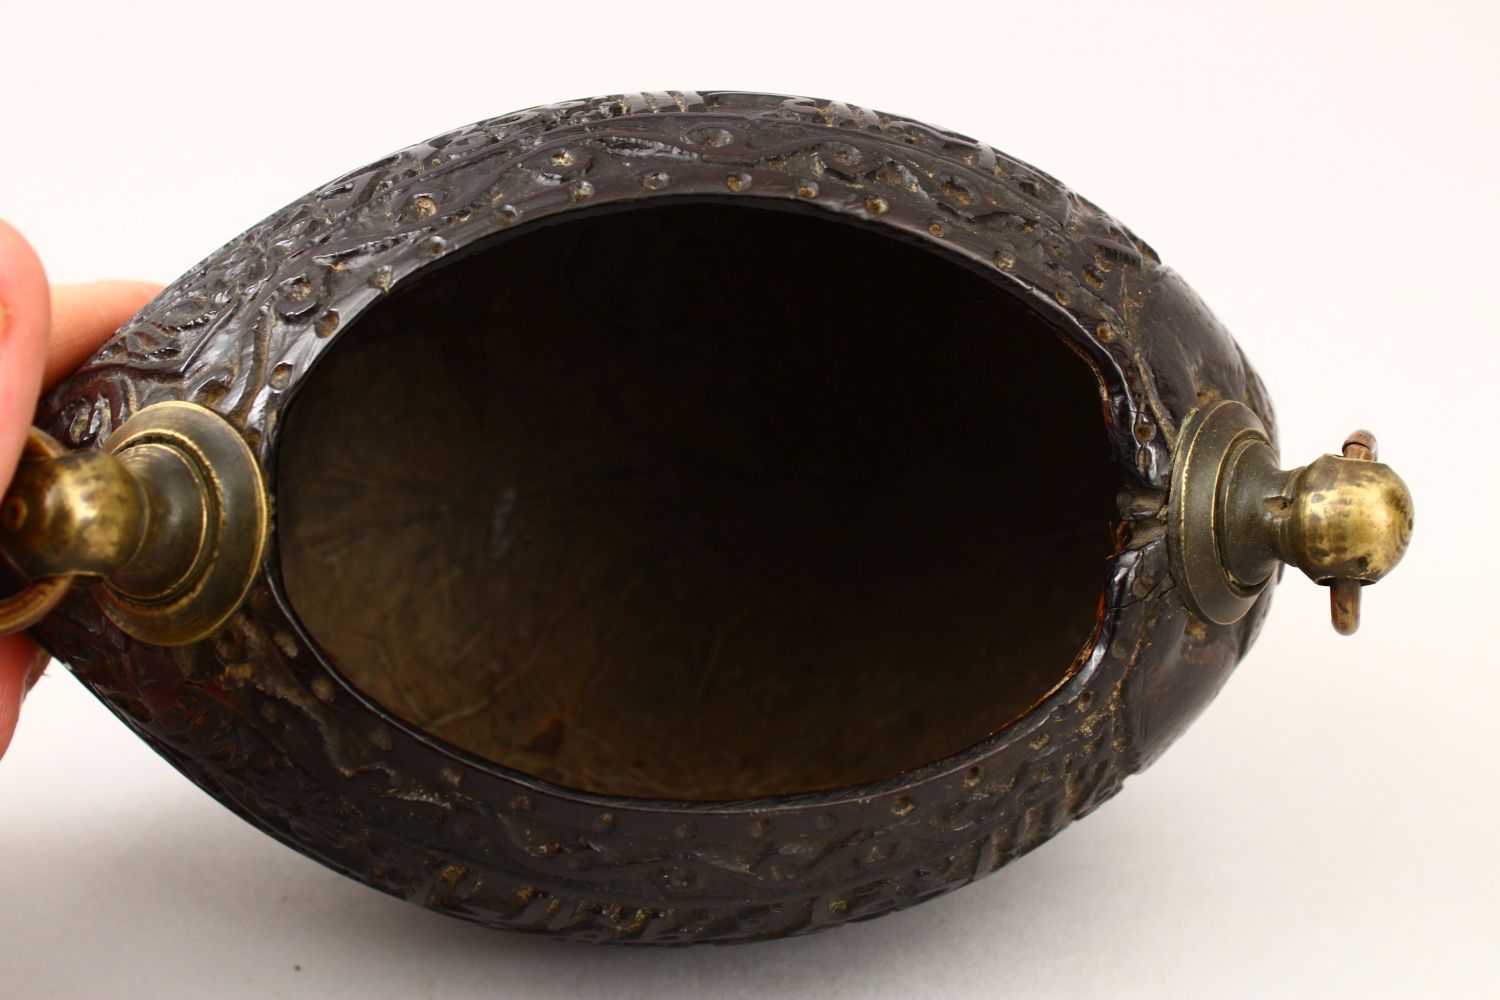 A GOOD 19TH CENTURY ISLAMIC COCO KASHKOOL, carved with Islamic calligraphy and scroll decoration - Image 12 of 14